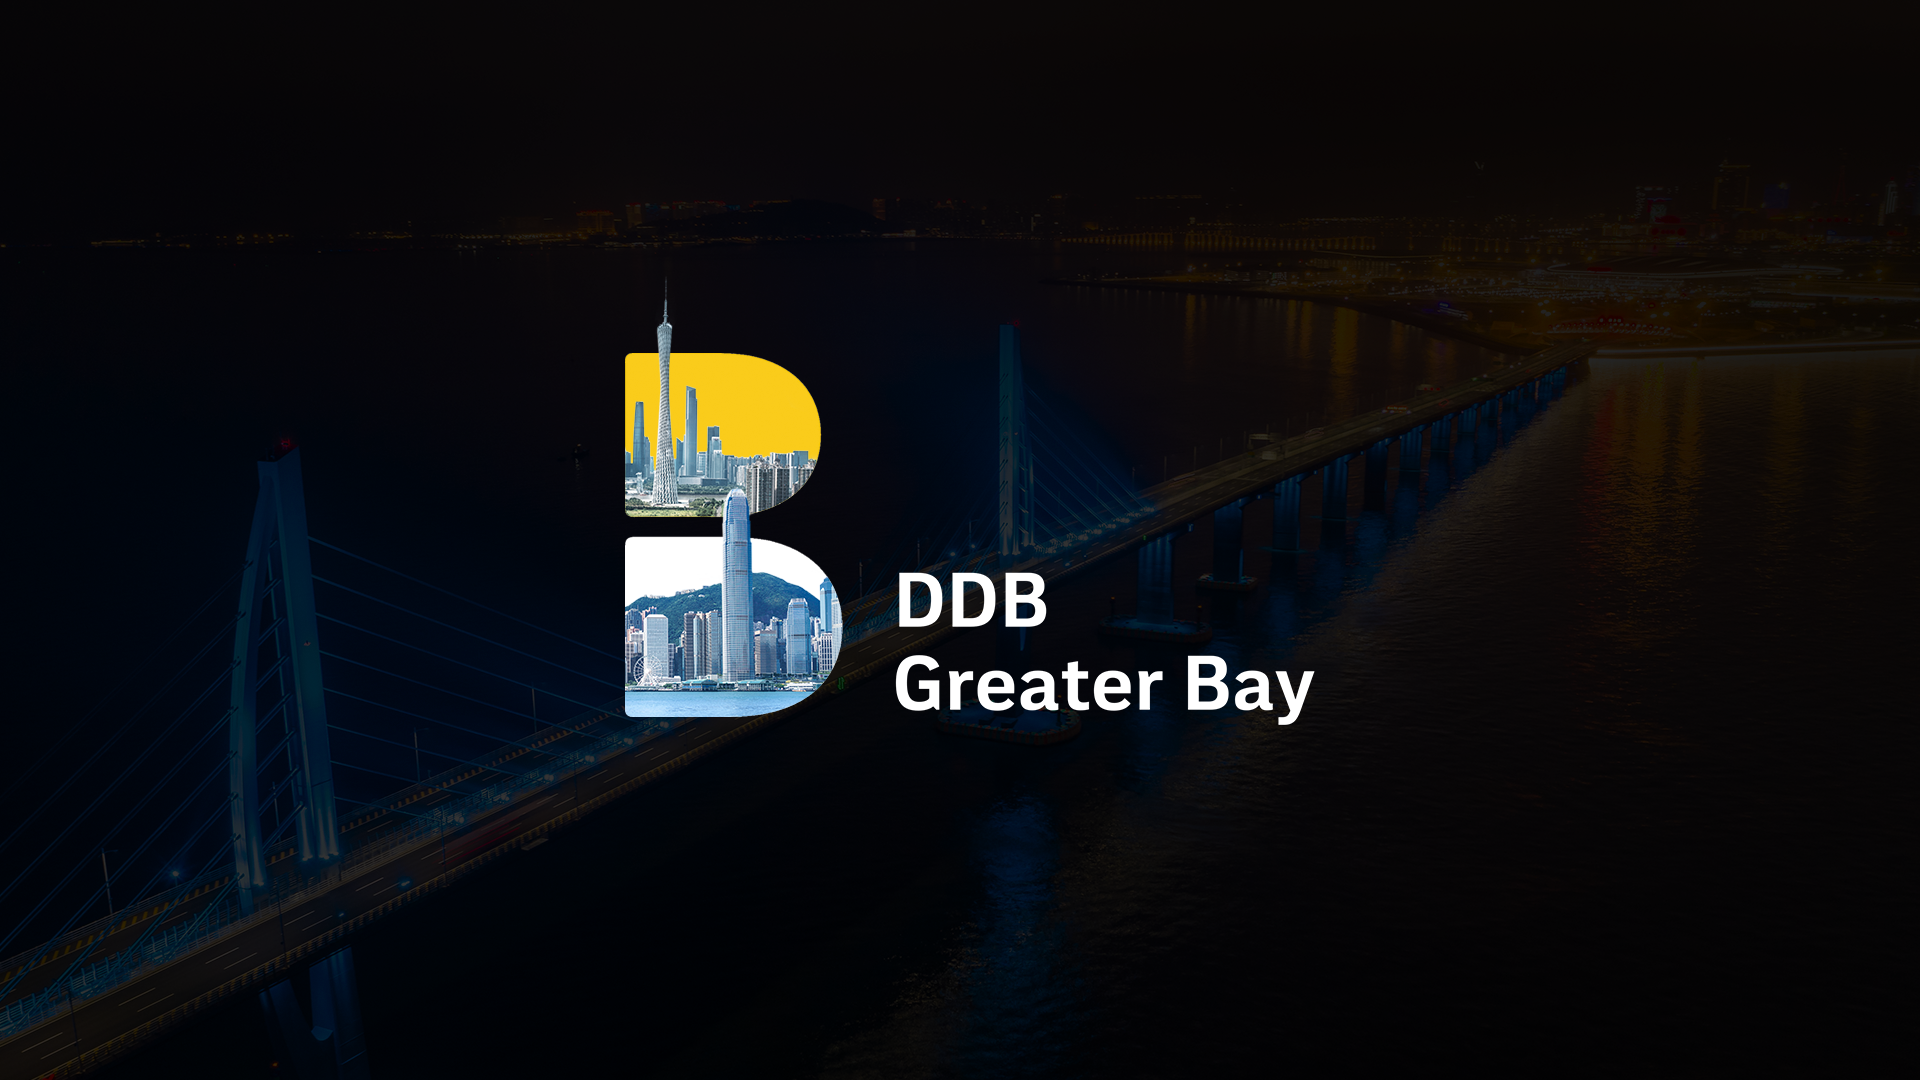 Introducing DDB Greater Bay